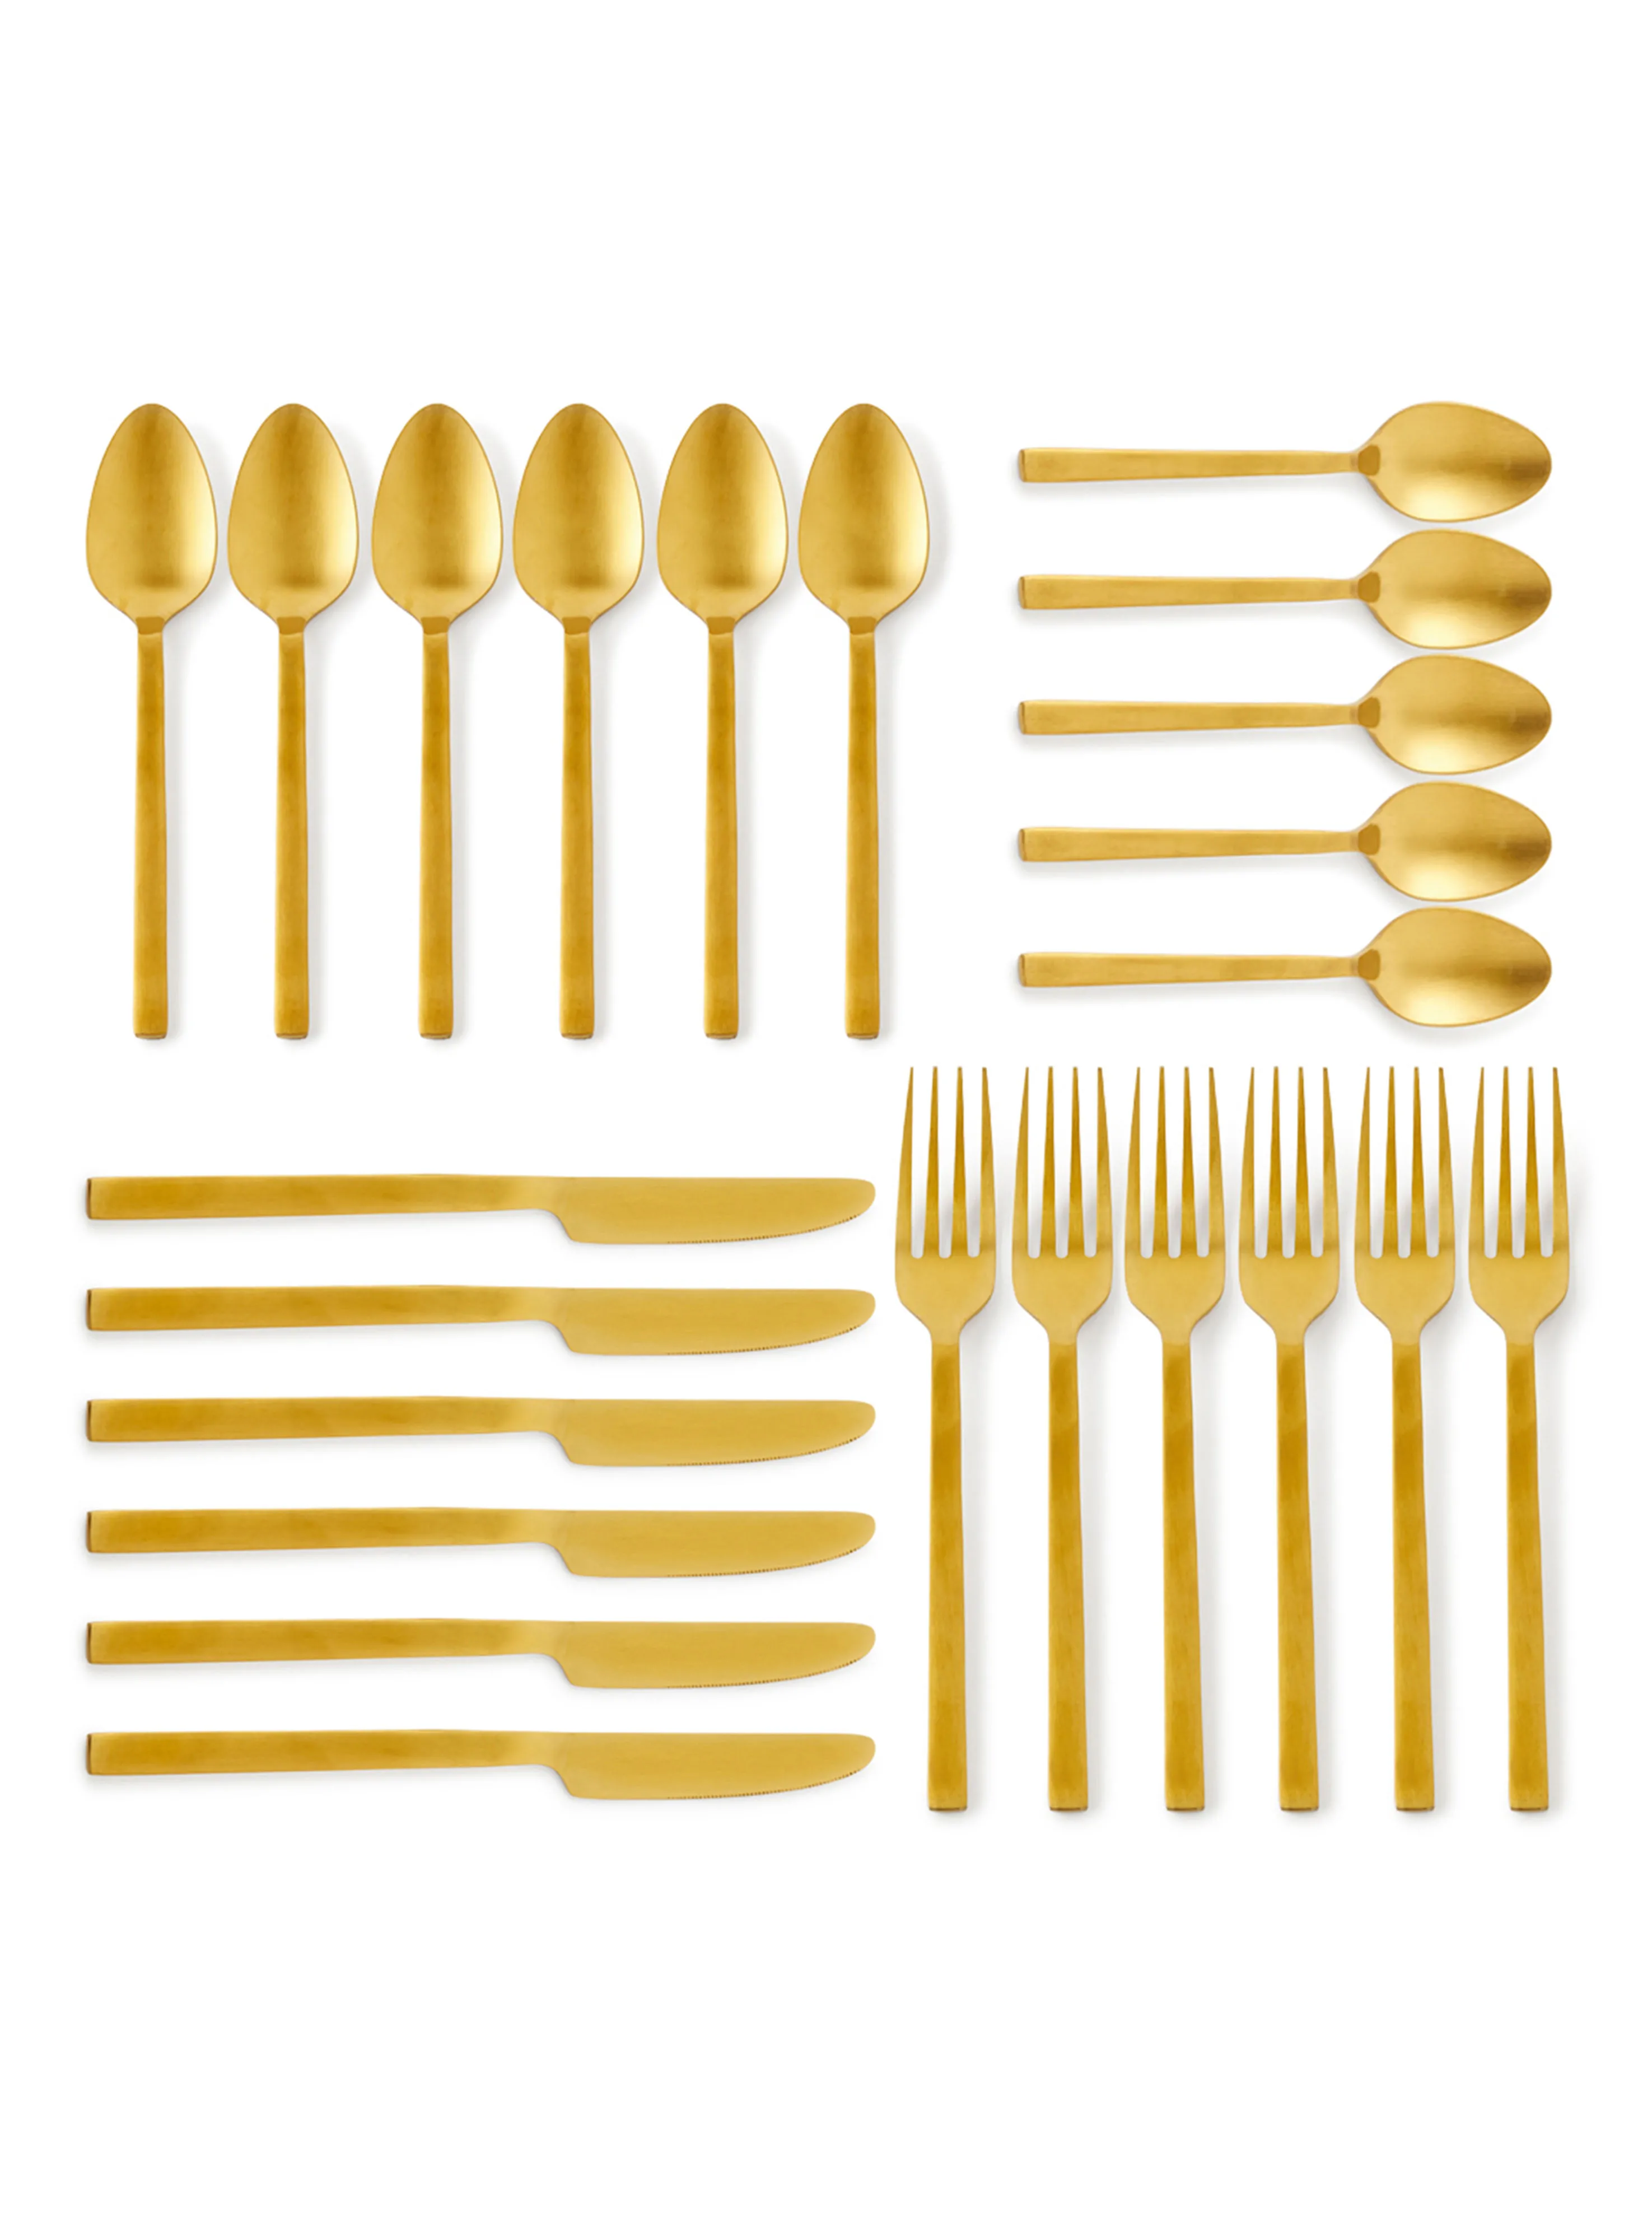 noon east 24 Piece Cutlery Set - Made Of Stainless Steel - Silverware Flatware - Spoons And Forks Set, Spoon Set - Table Spoons, Tea Spoons, Forks, Knives - Serves 6 - Design Gold Lyra